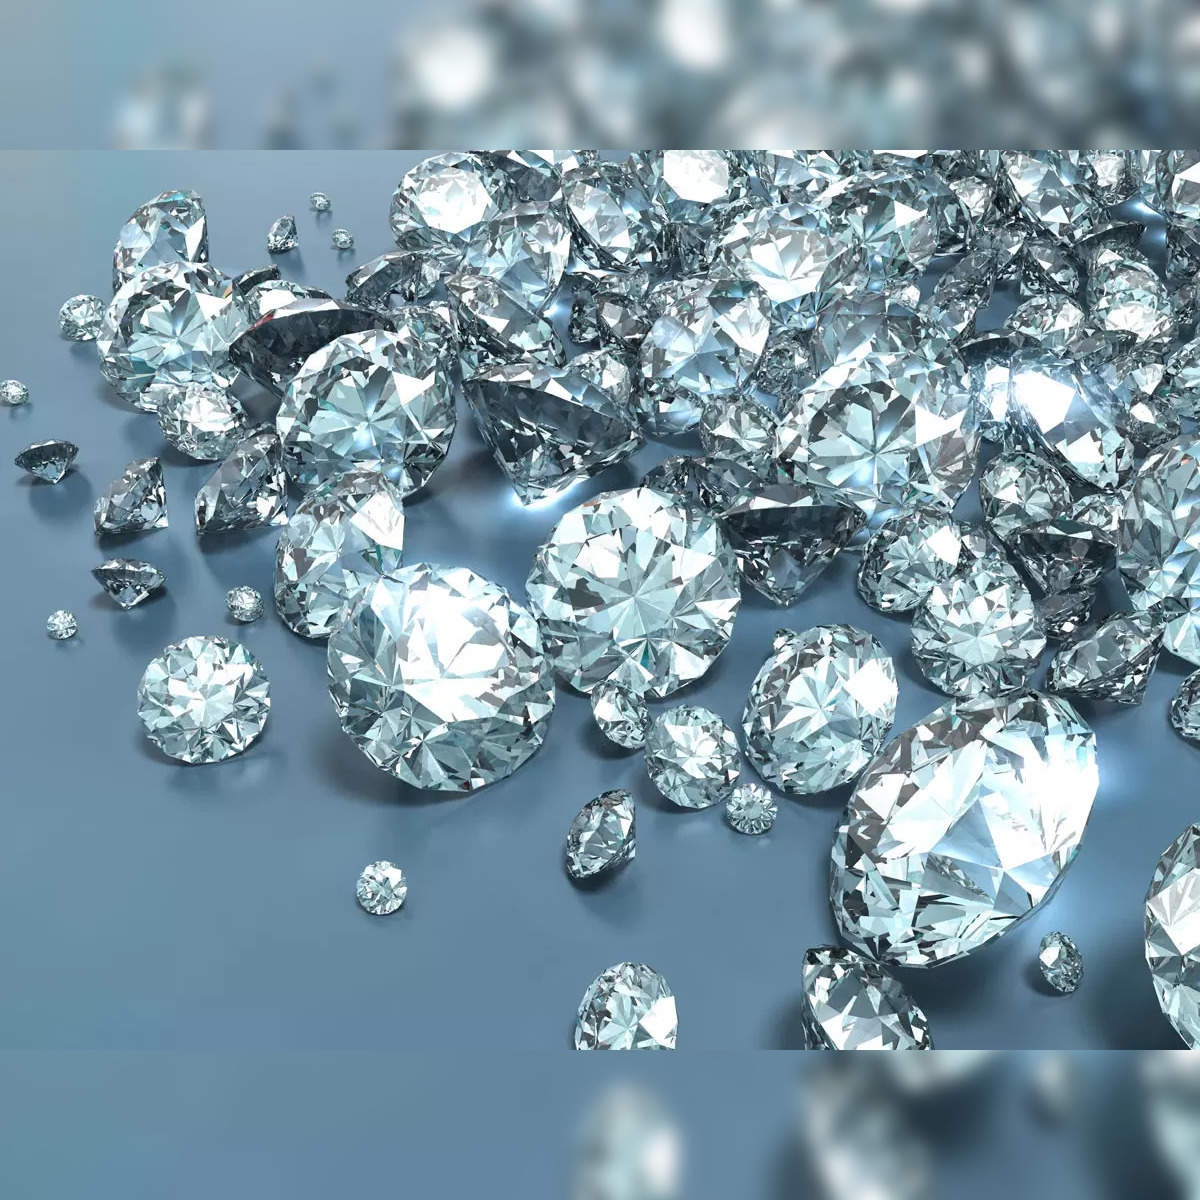 Lab-grown gems are crashing prices for one key type of diamond